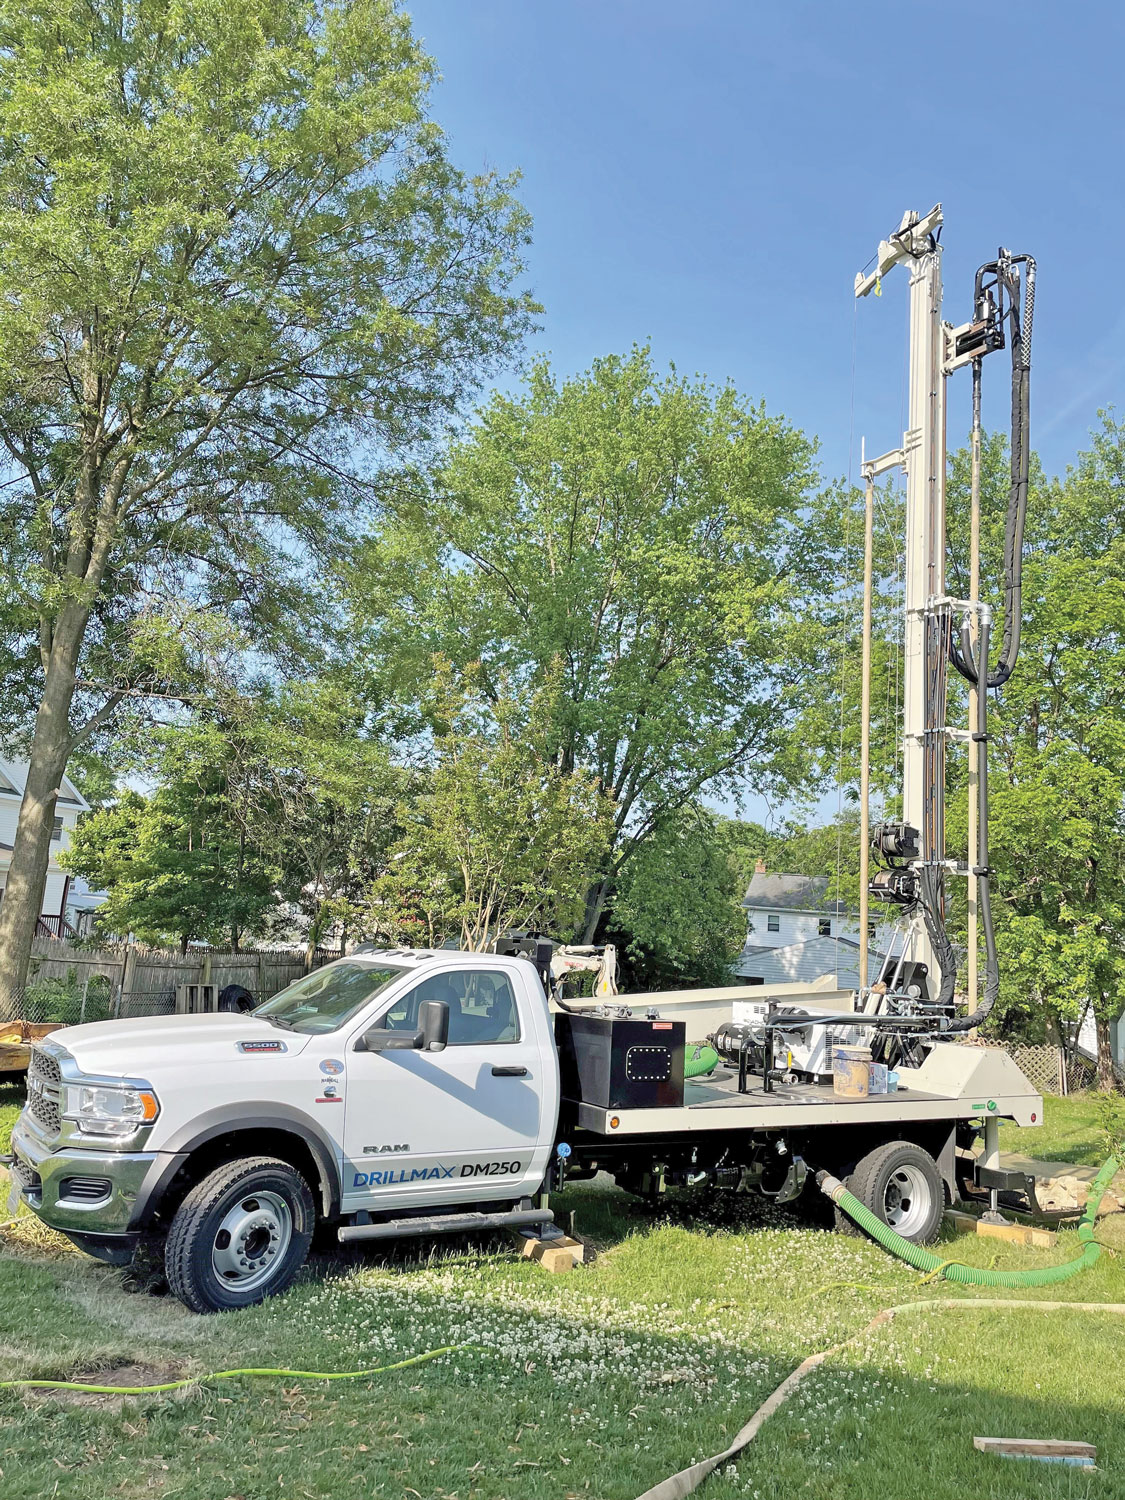 Purchased for its mud rotary capabilities, the DM250 performs air rotary drilling rock wells in palm-sized cobbles using an auxiliary air compressor.